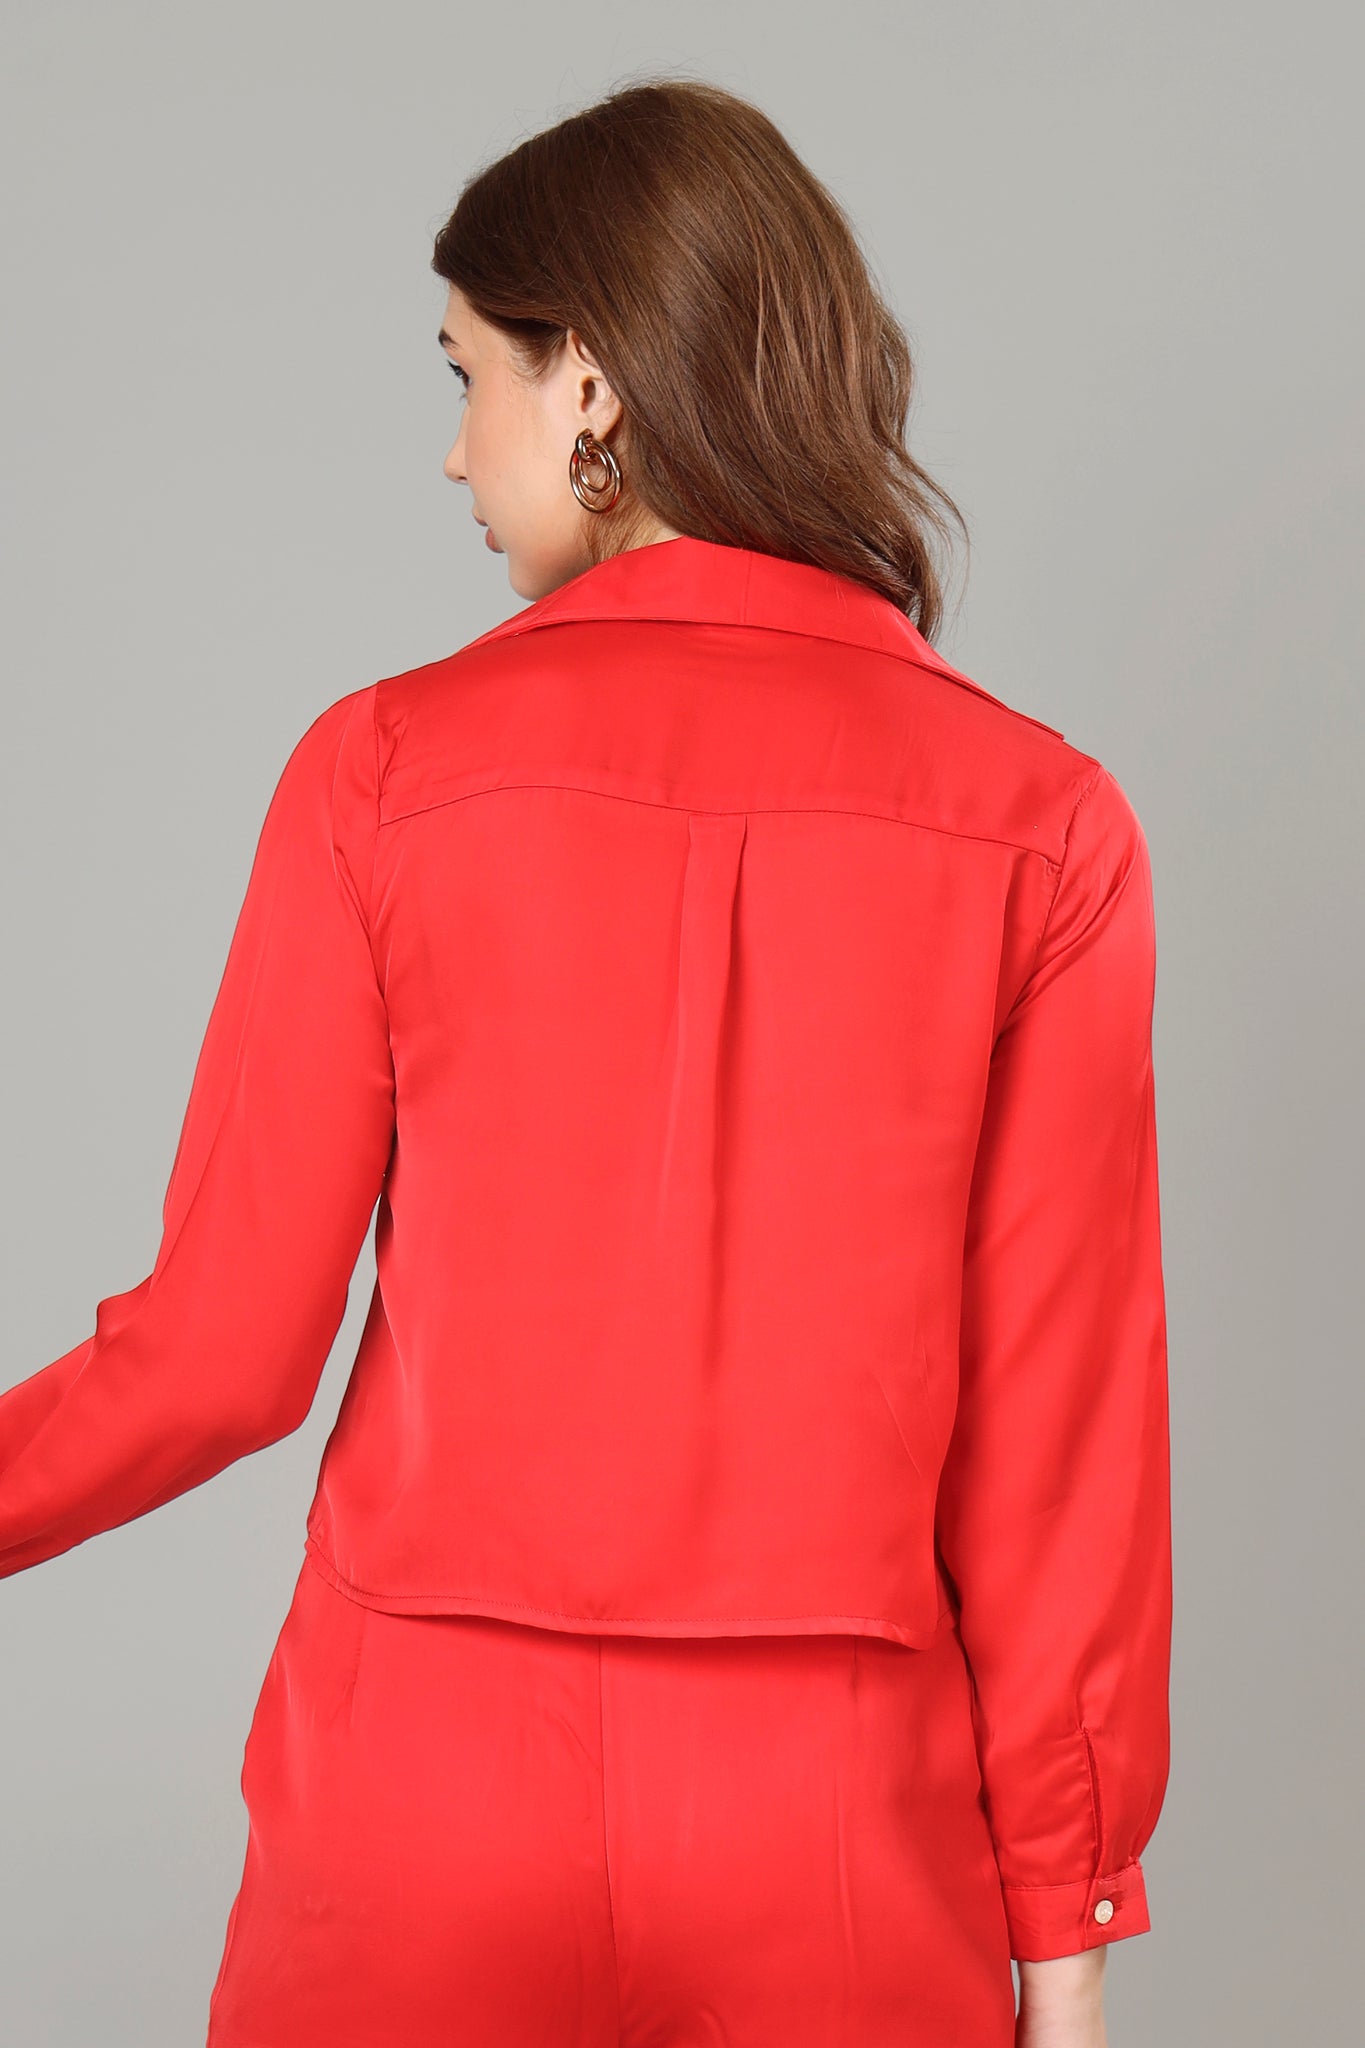 Romantic Red Cropped Shirt For Women